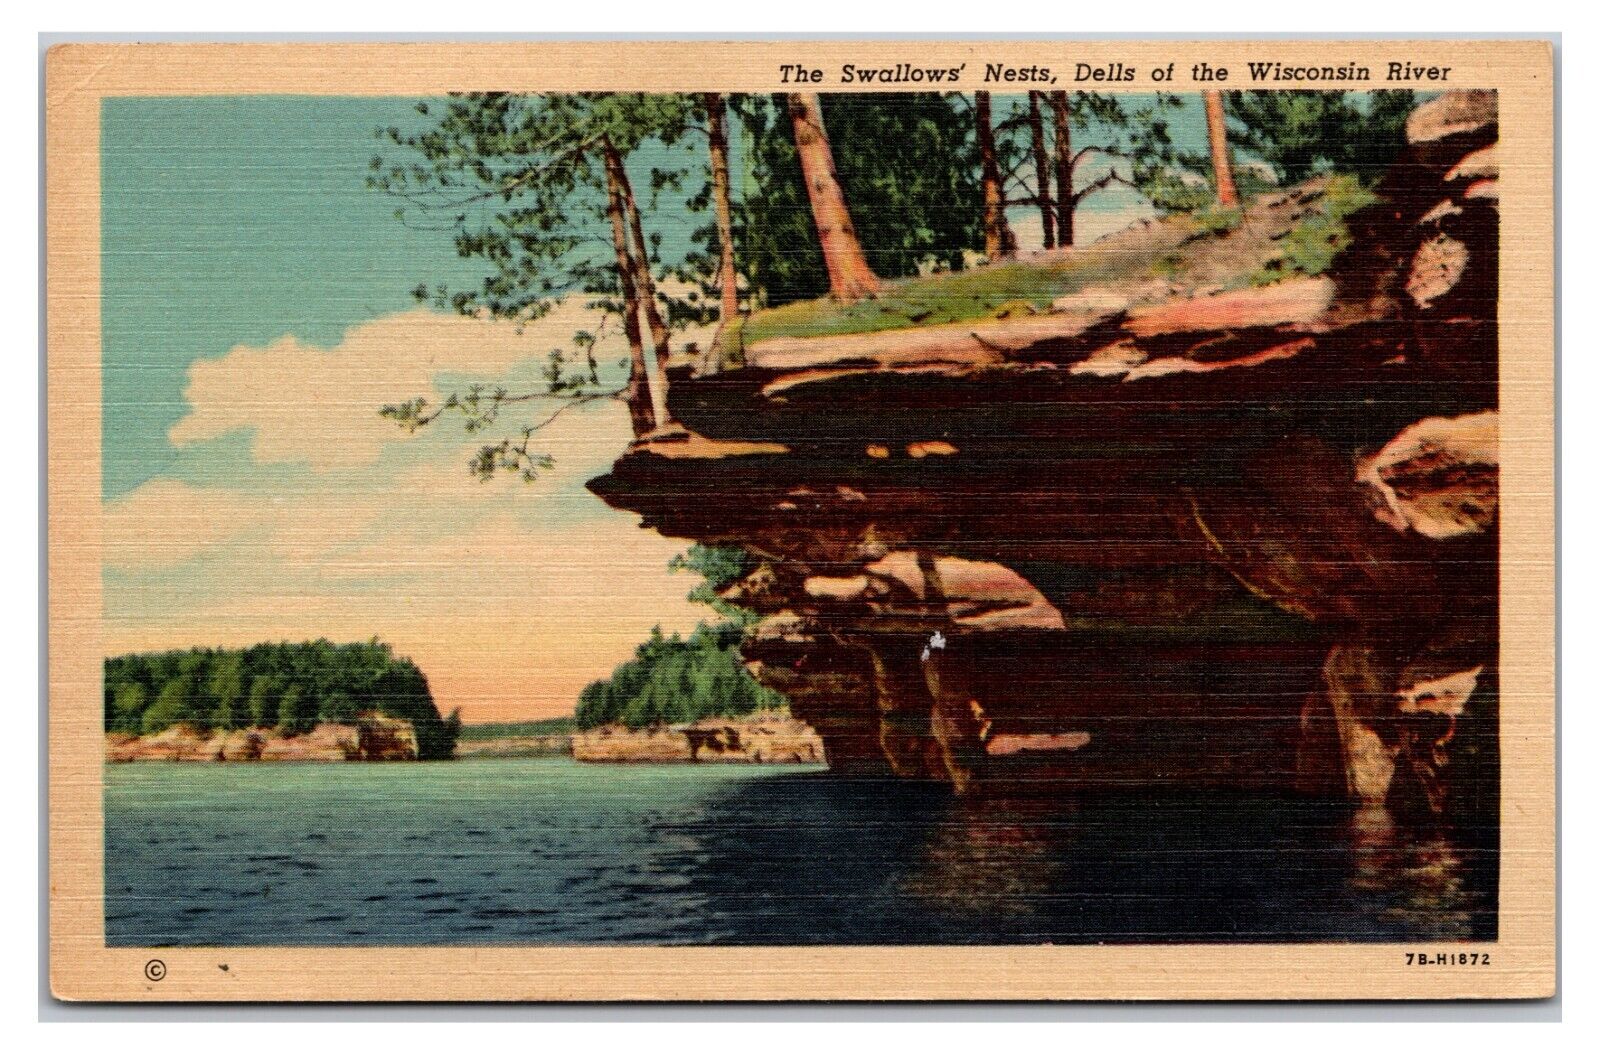 VTG 1930s- The Swallows' Nest- Wisconsin Dells - Wisconsin Postcard (UnPosted)